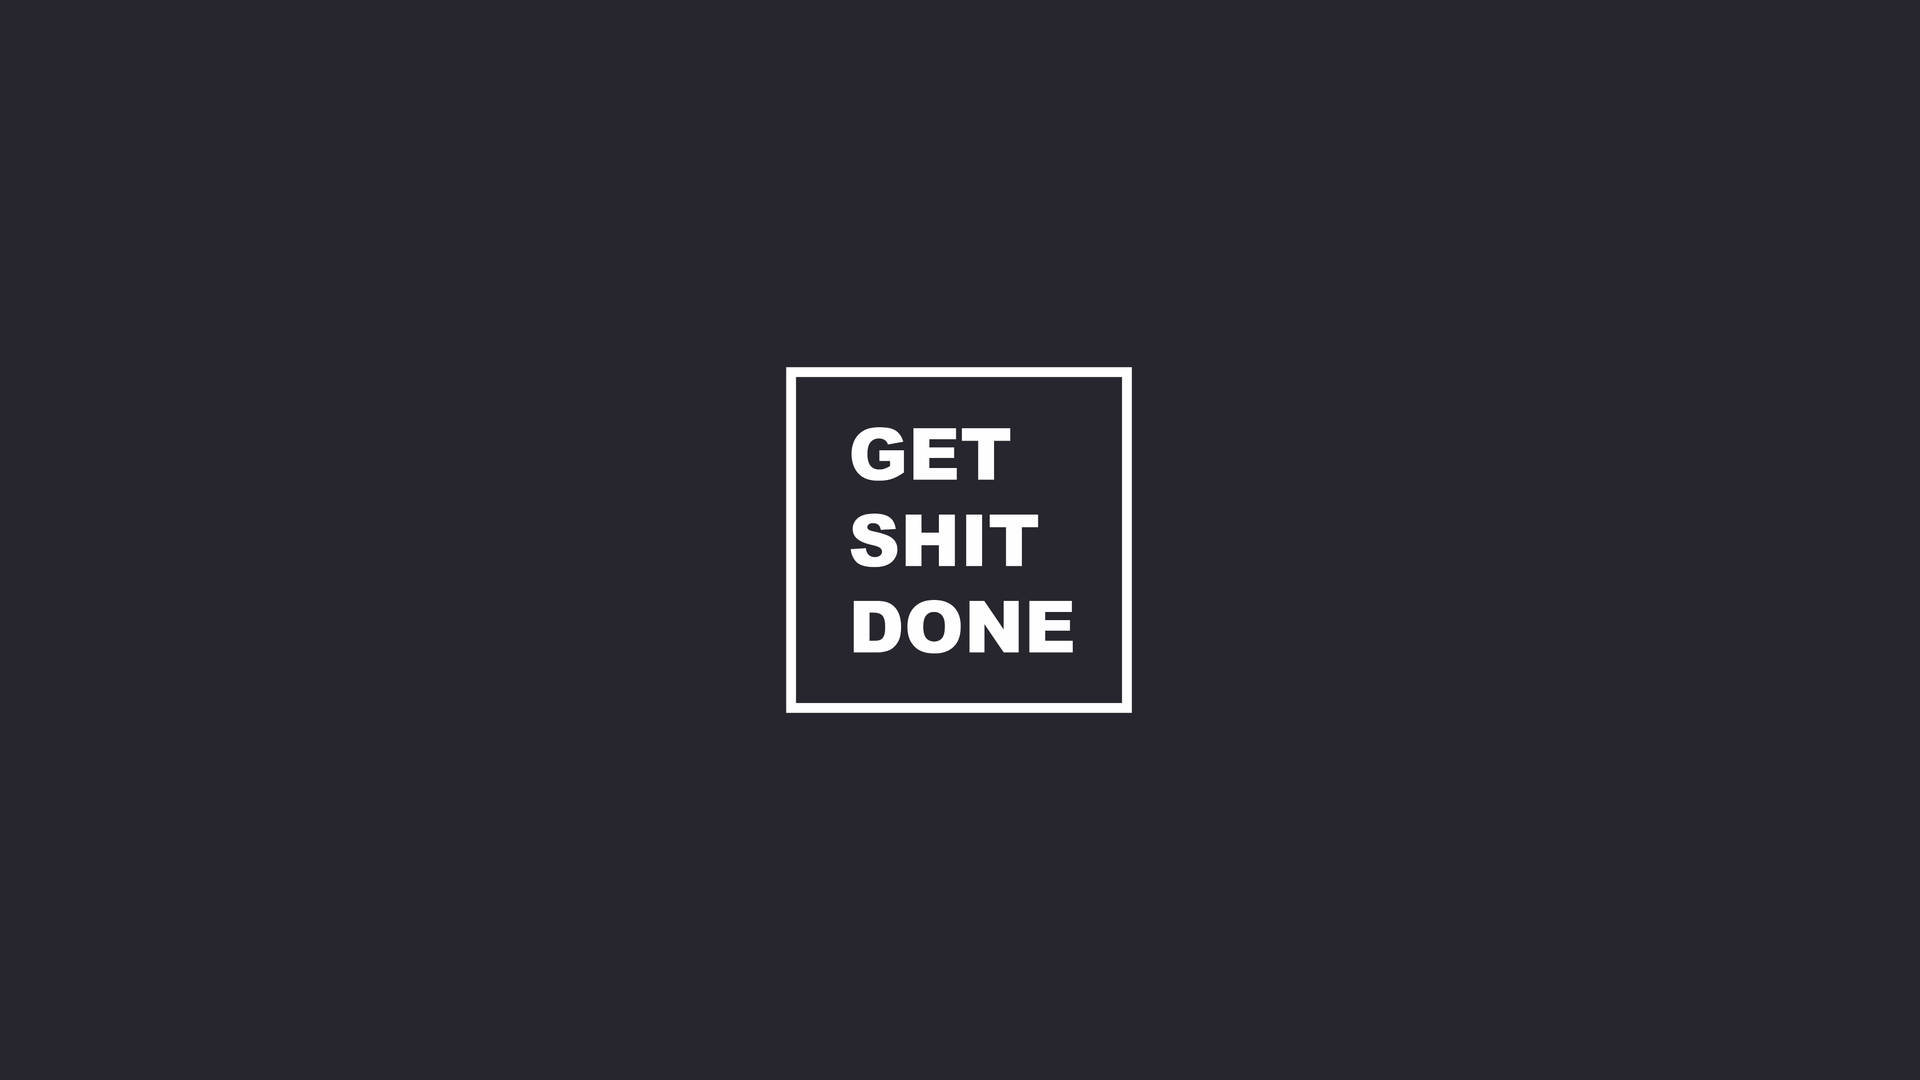 https://wallpapers.com/images/hd/get-it-done-motivational-quote-ake835bvoseb11t8.jpg